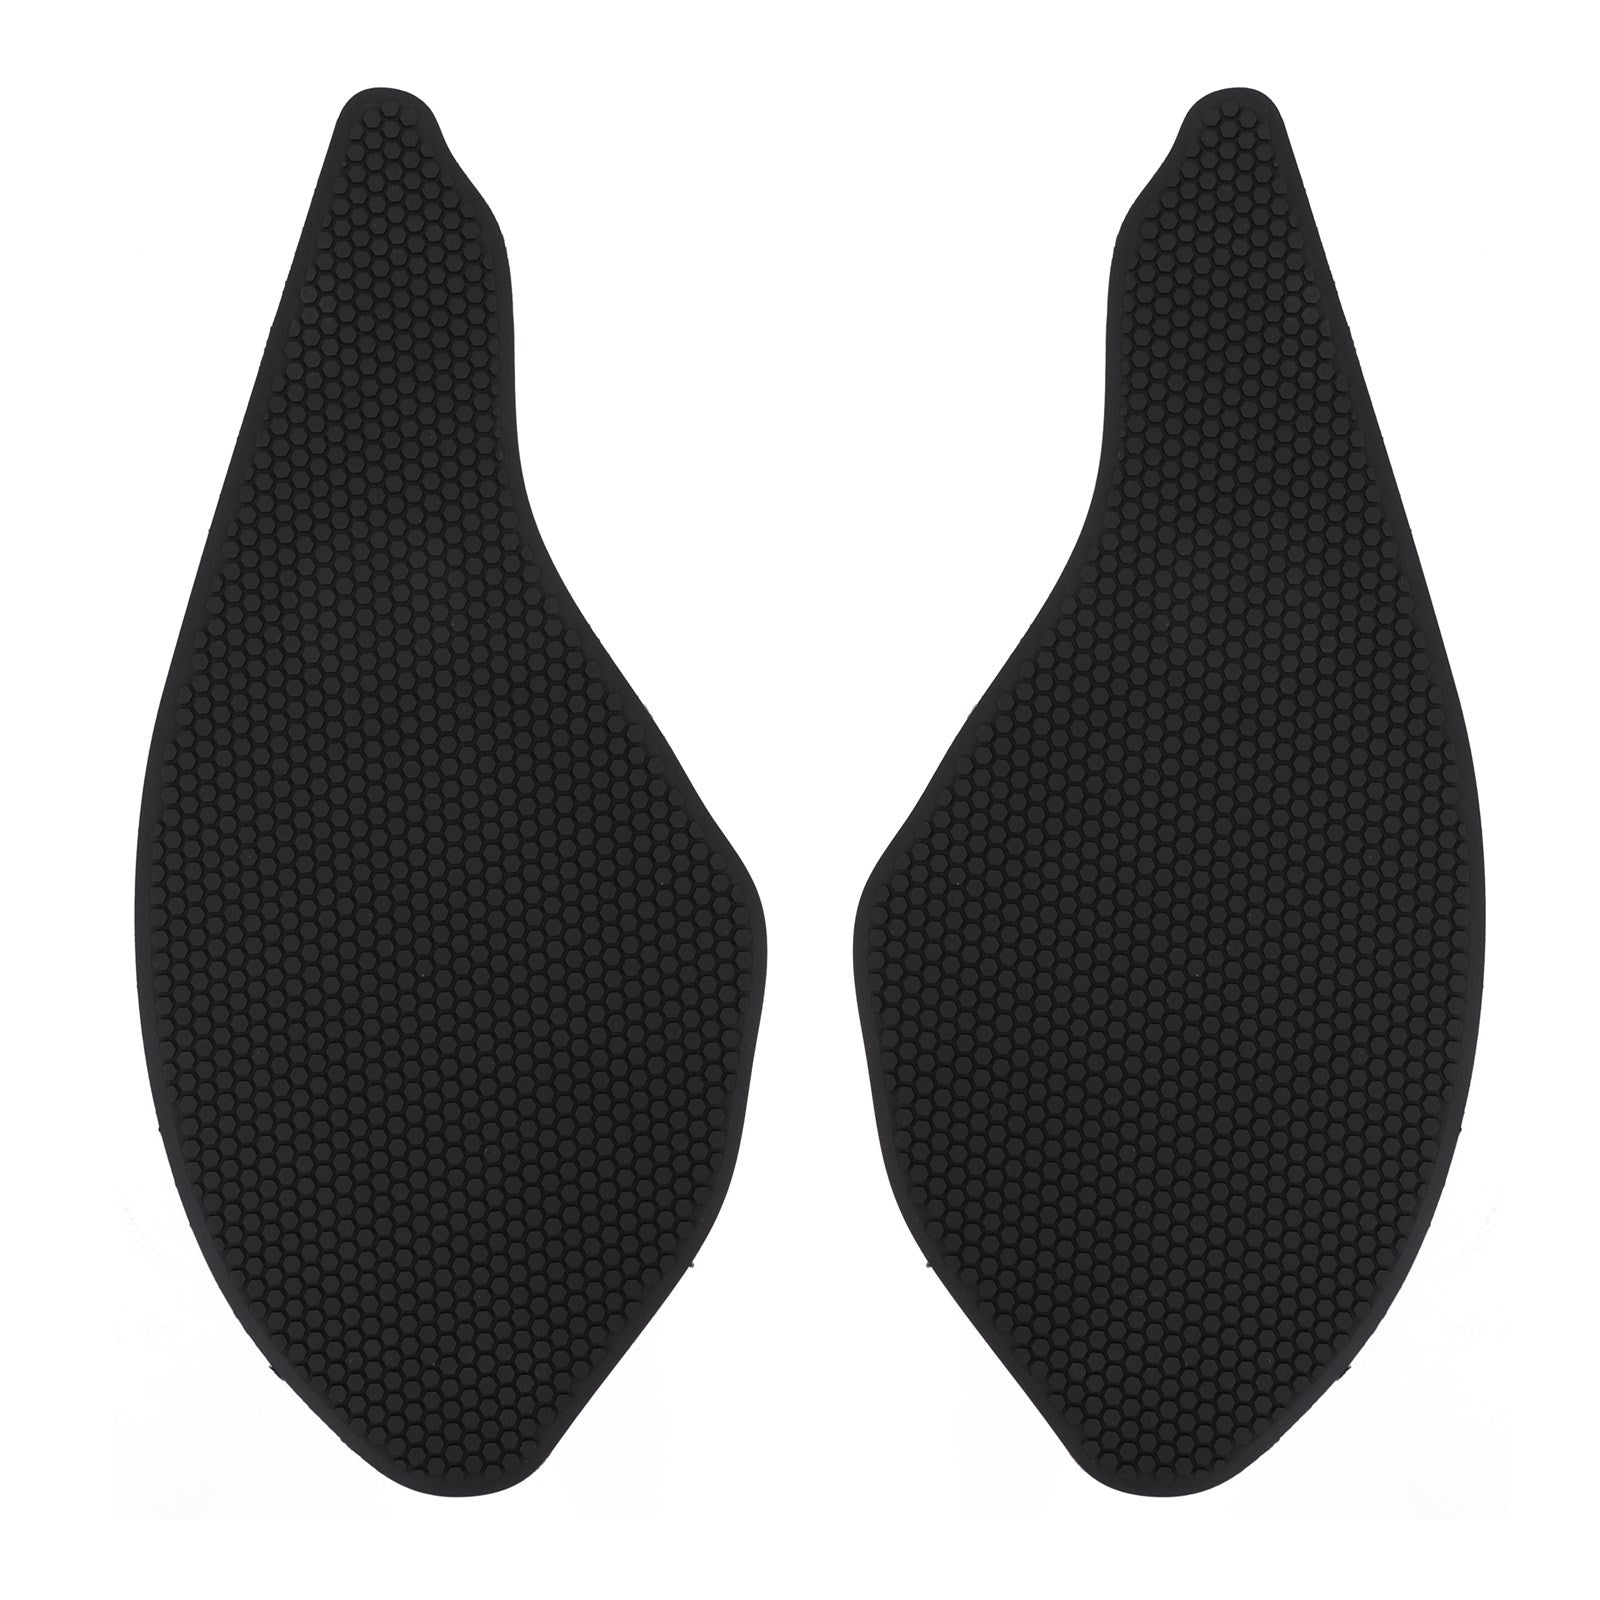 Tank Pads Traction Grips Protector 2-Piece Kit Fit For TRIUMPH DAYTONA 13/16